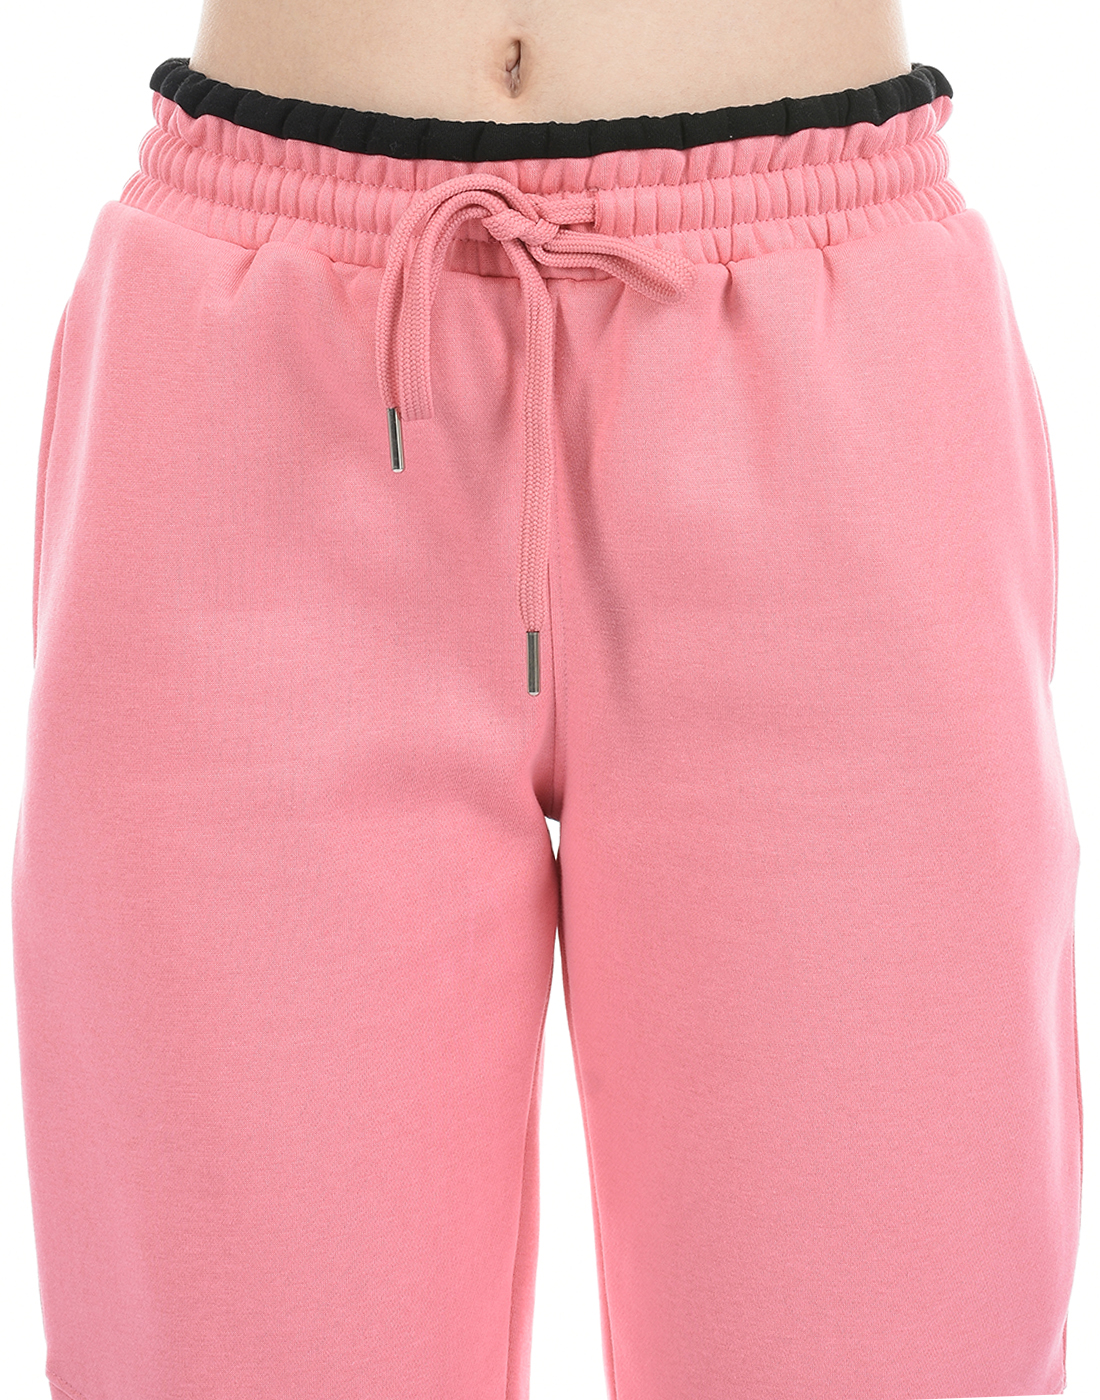 Oneway Women Solid Pink Track Pants